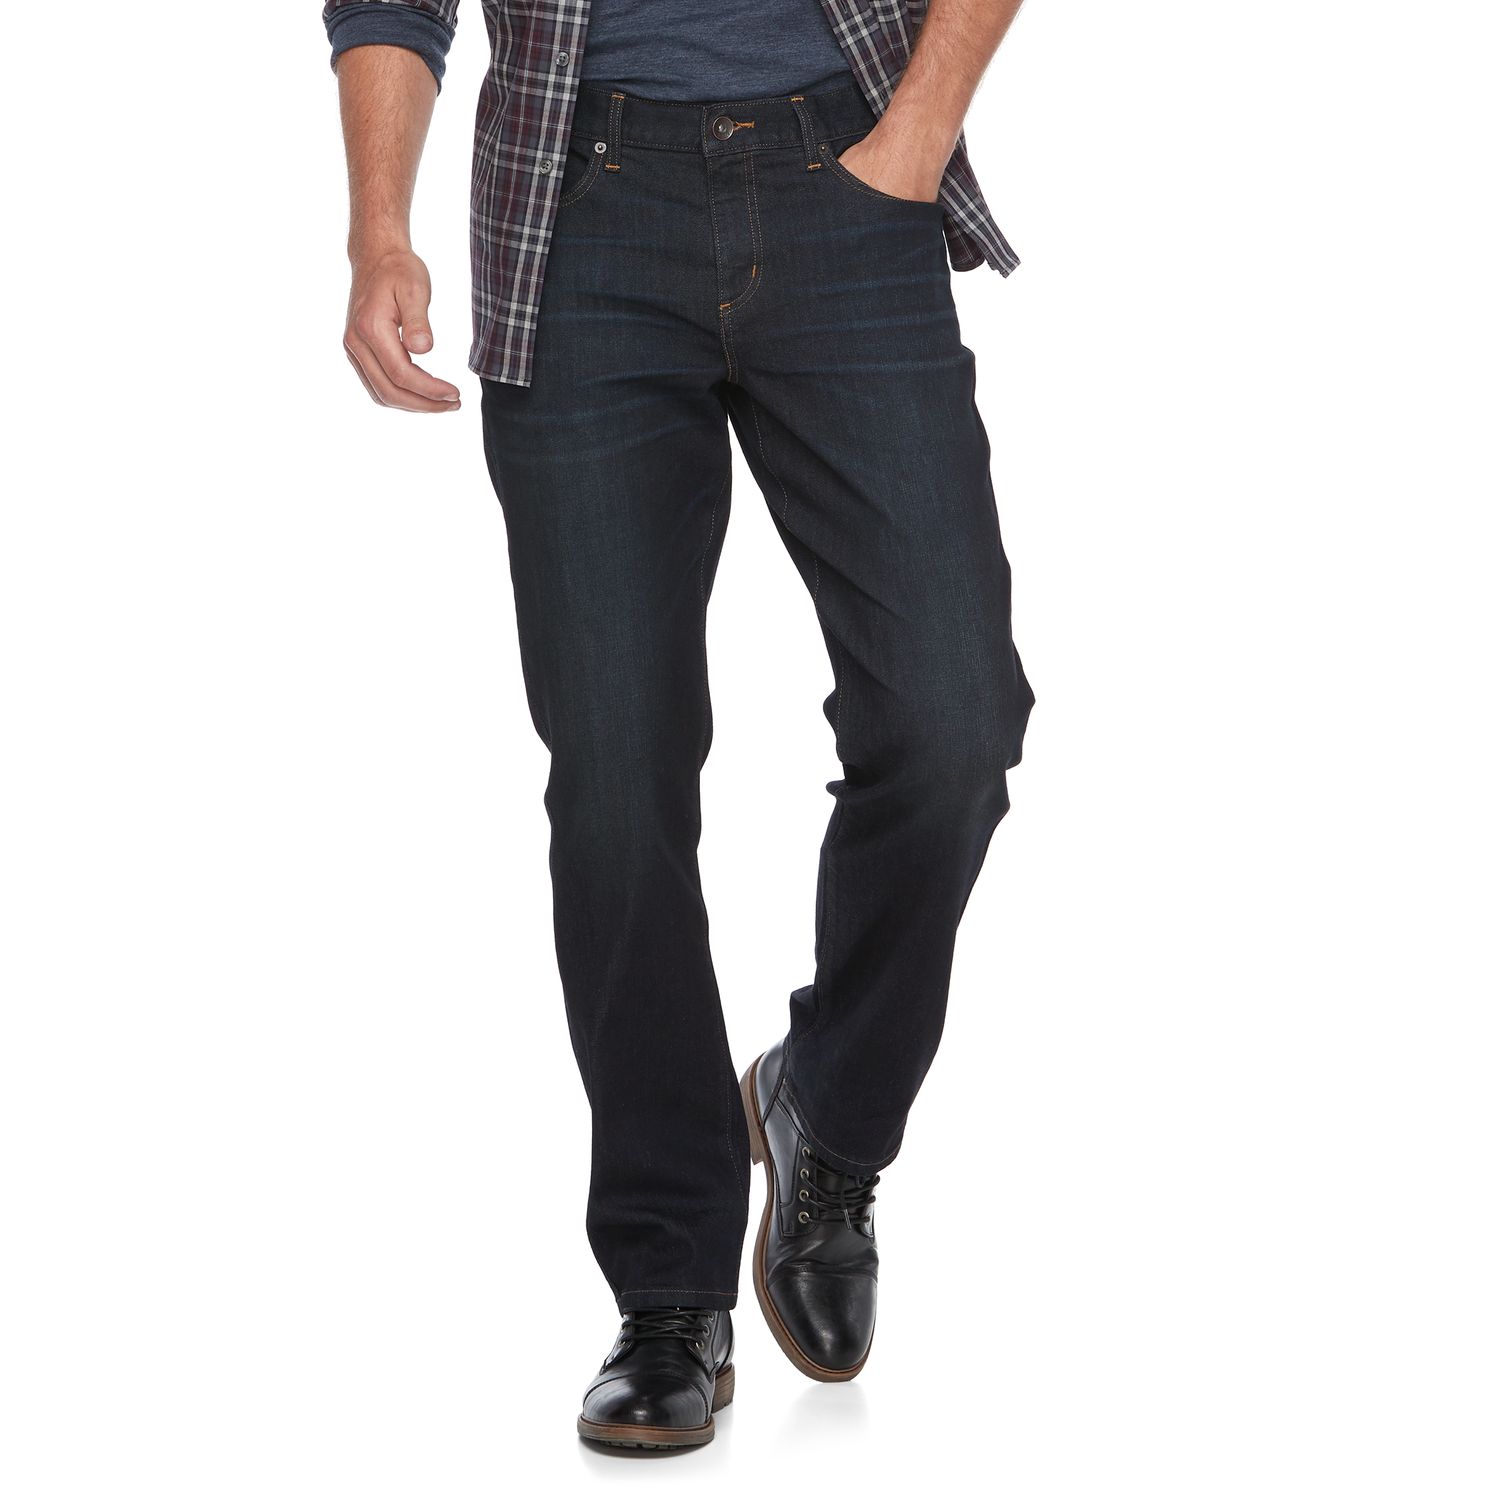 apt 9 men's relaxed fit jeans